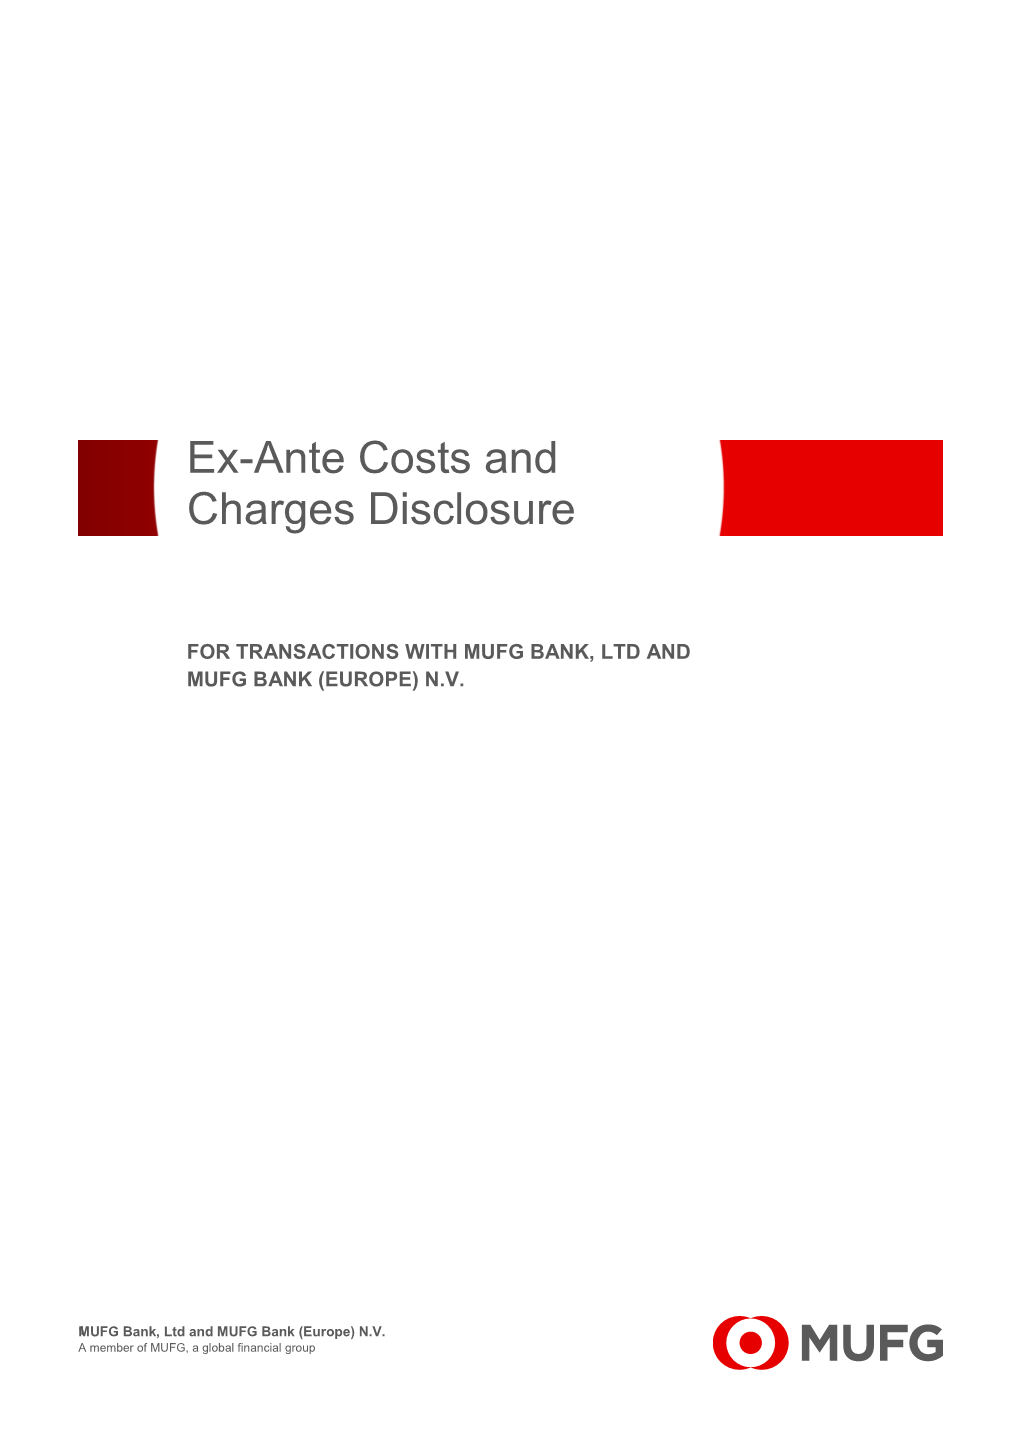 (Ex-Ante) Costs and Charges Disclosure for Transactions